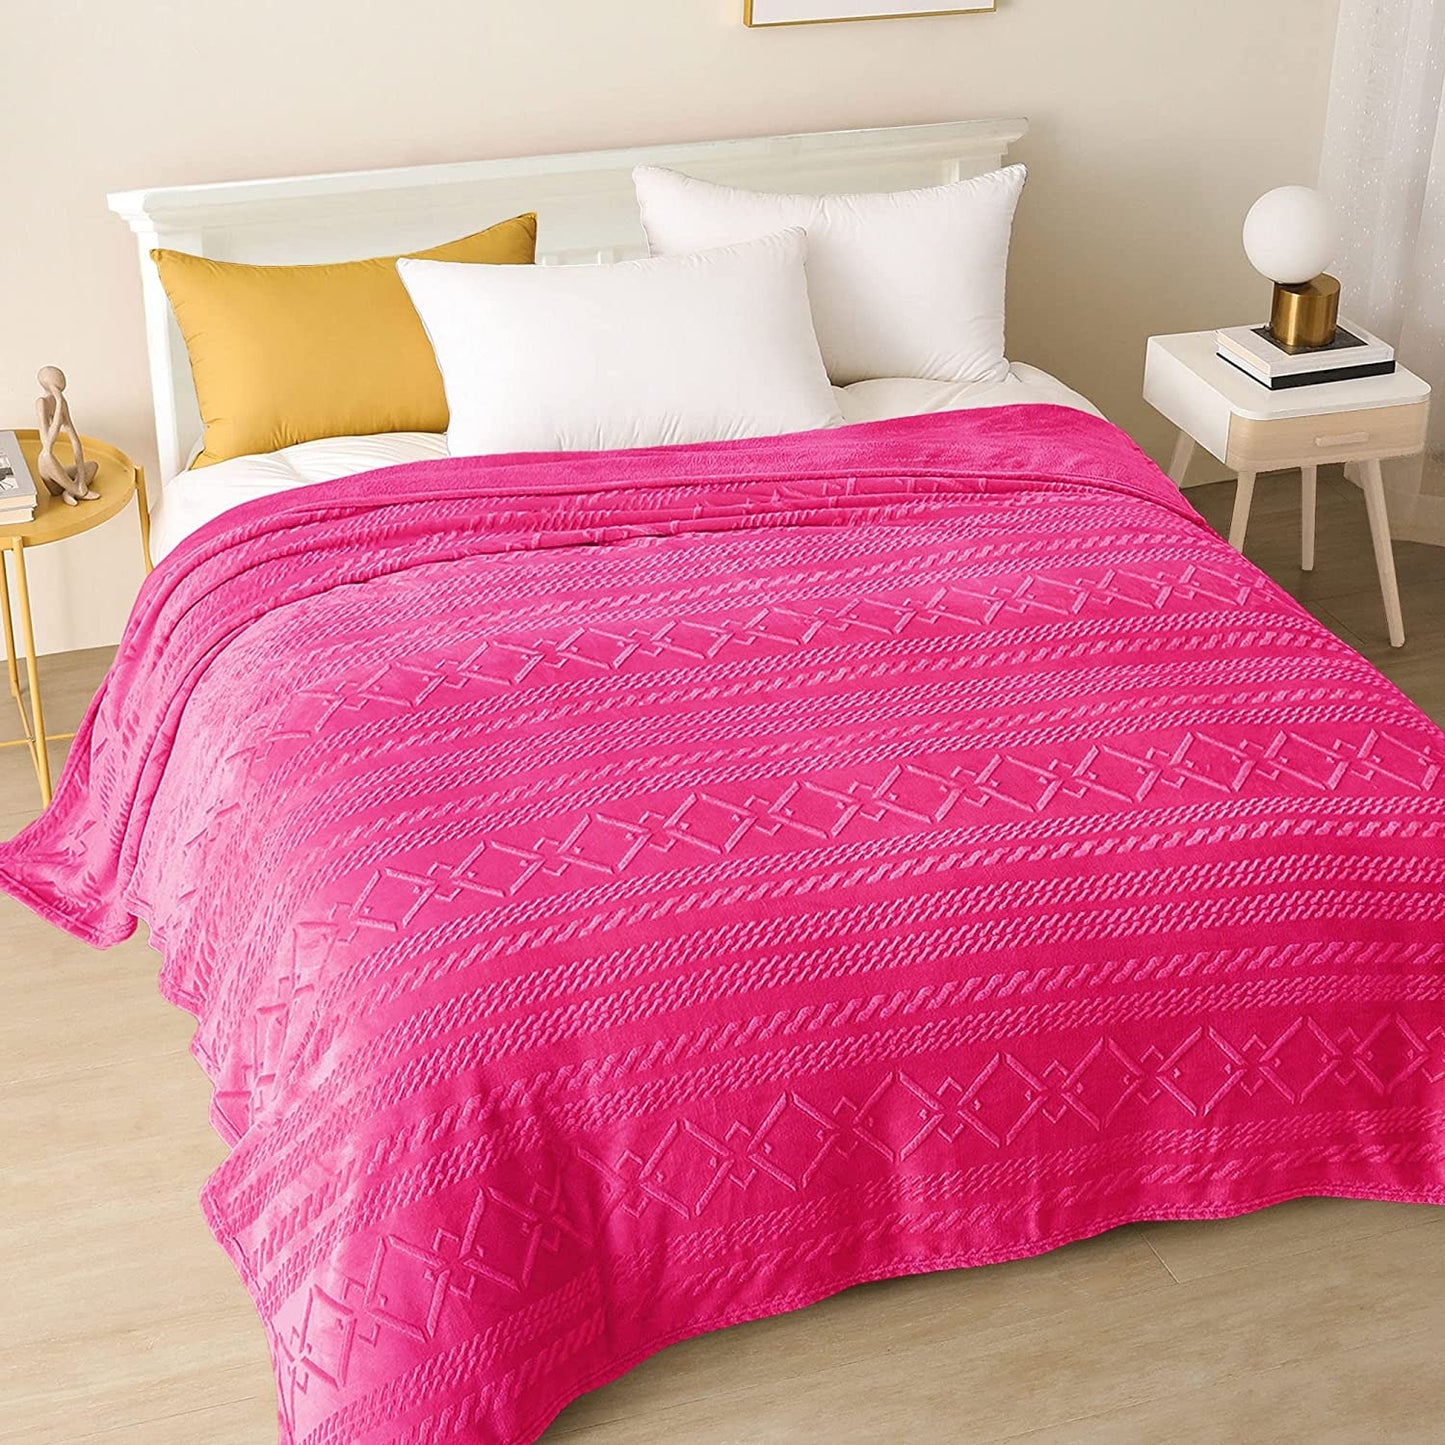 Exclusivo Mezcla Queen Size Soft Bed Blanket, Warm Fuzzy Luxury Bed Blankets, Decorative Geometry Pattern Plush Throw Blanket for Bed, 90x90 Inches, Hot Pink